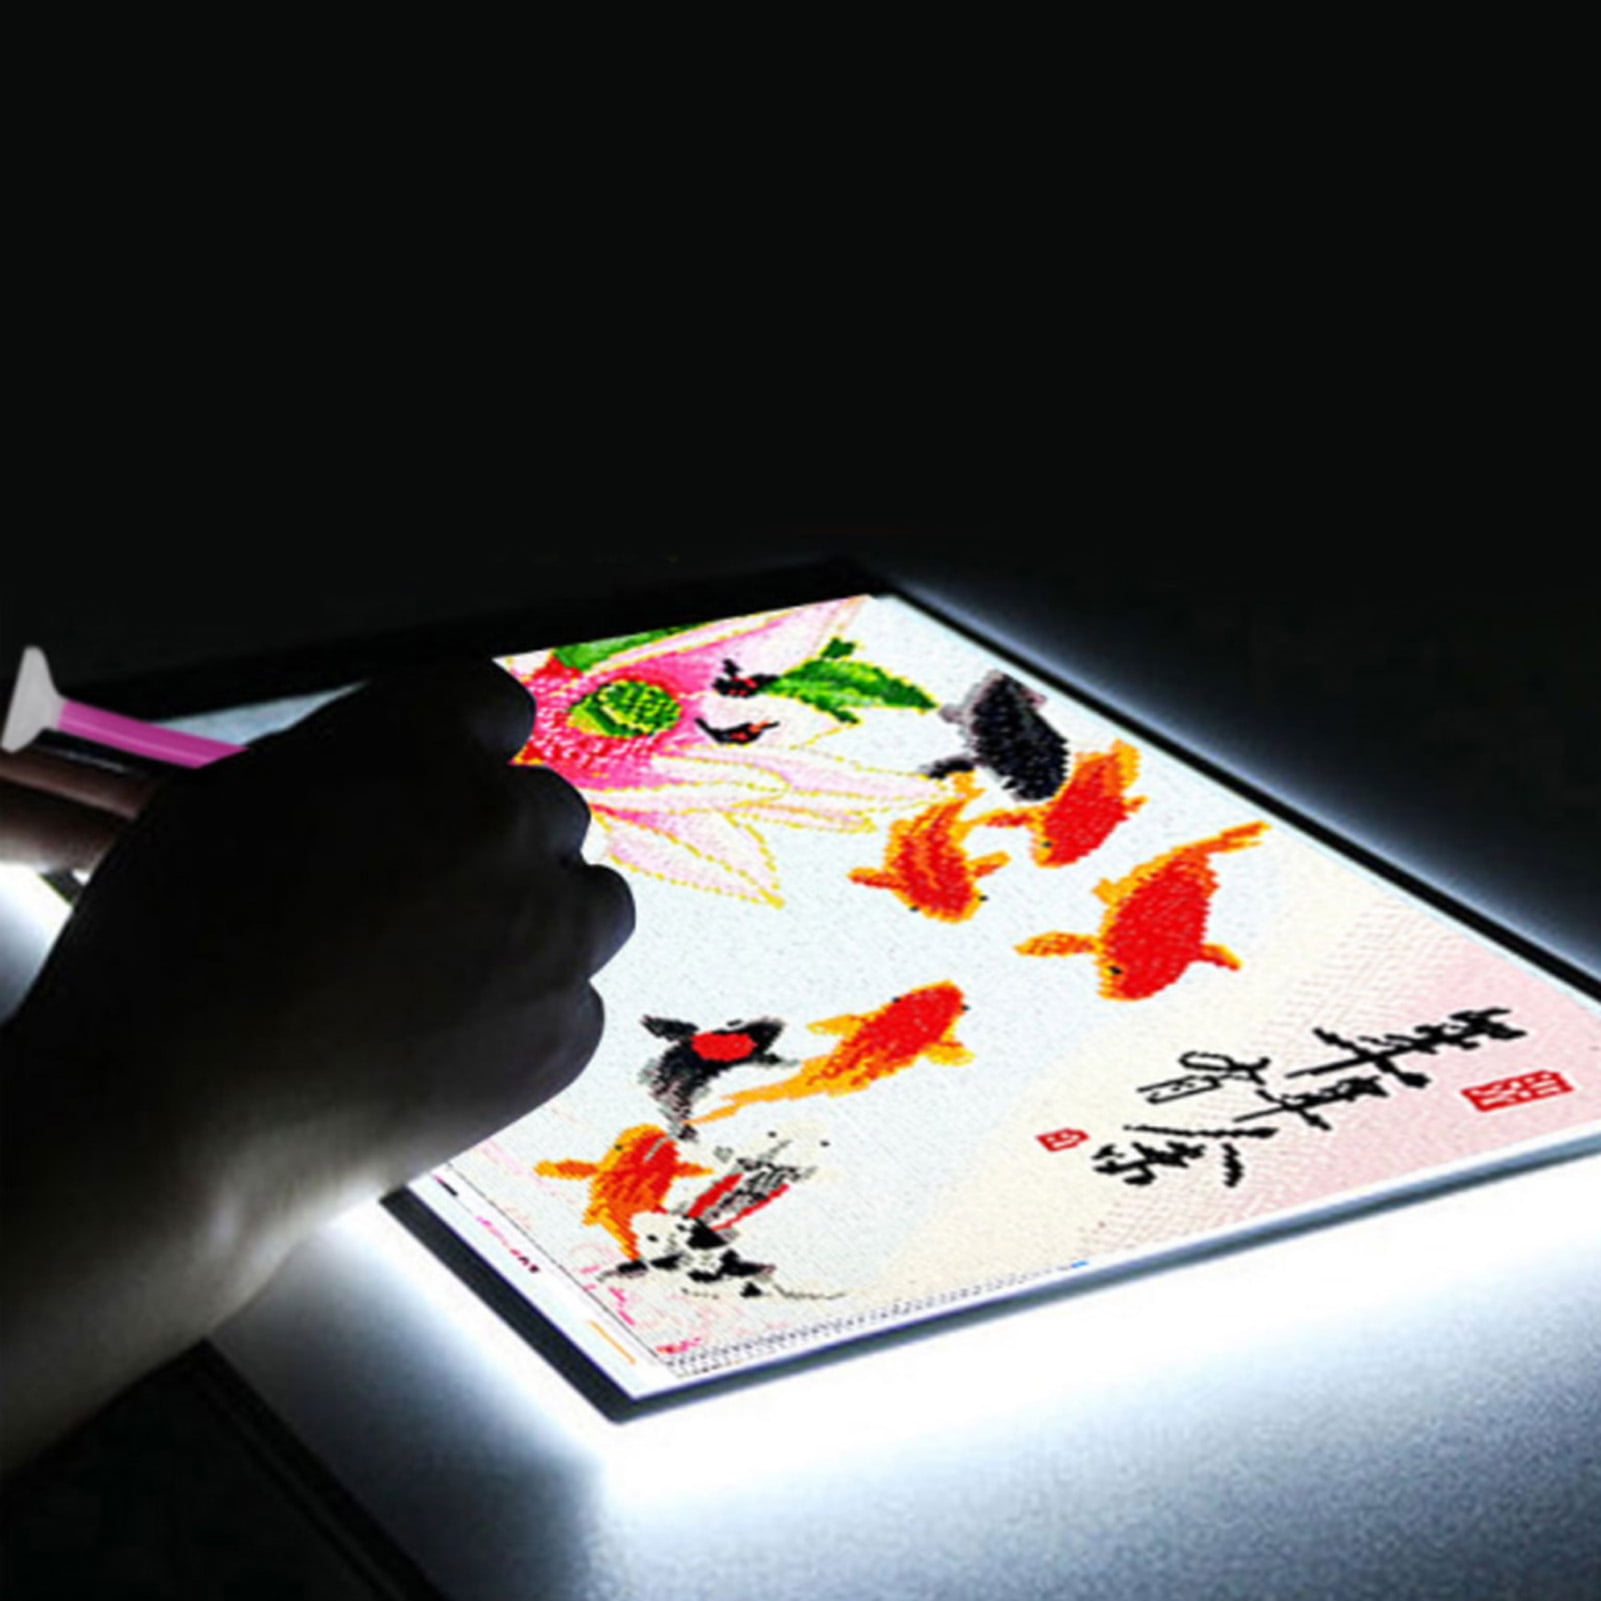 A4 LED-Light Pad, Portable Ultra-Thin Light Box with Dimmable